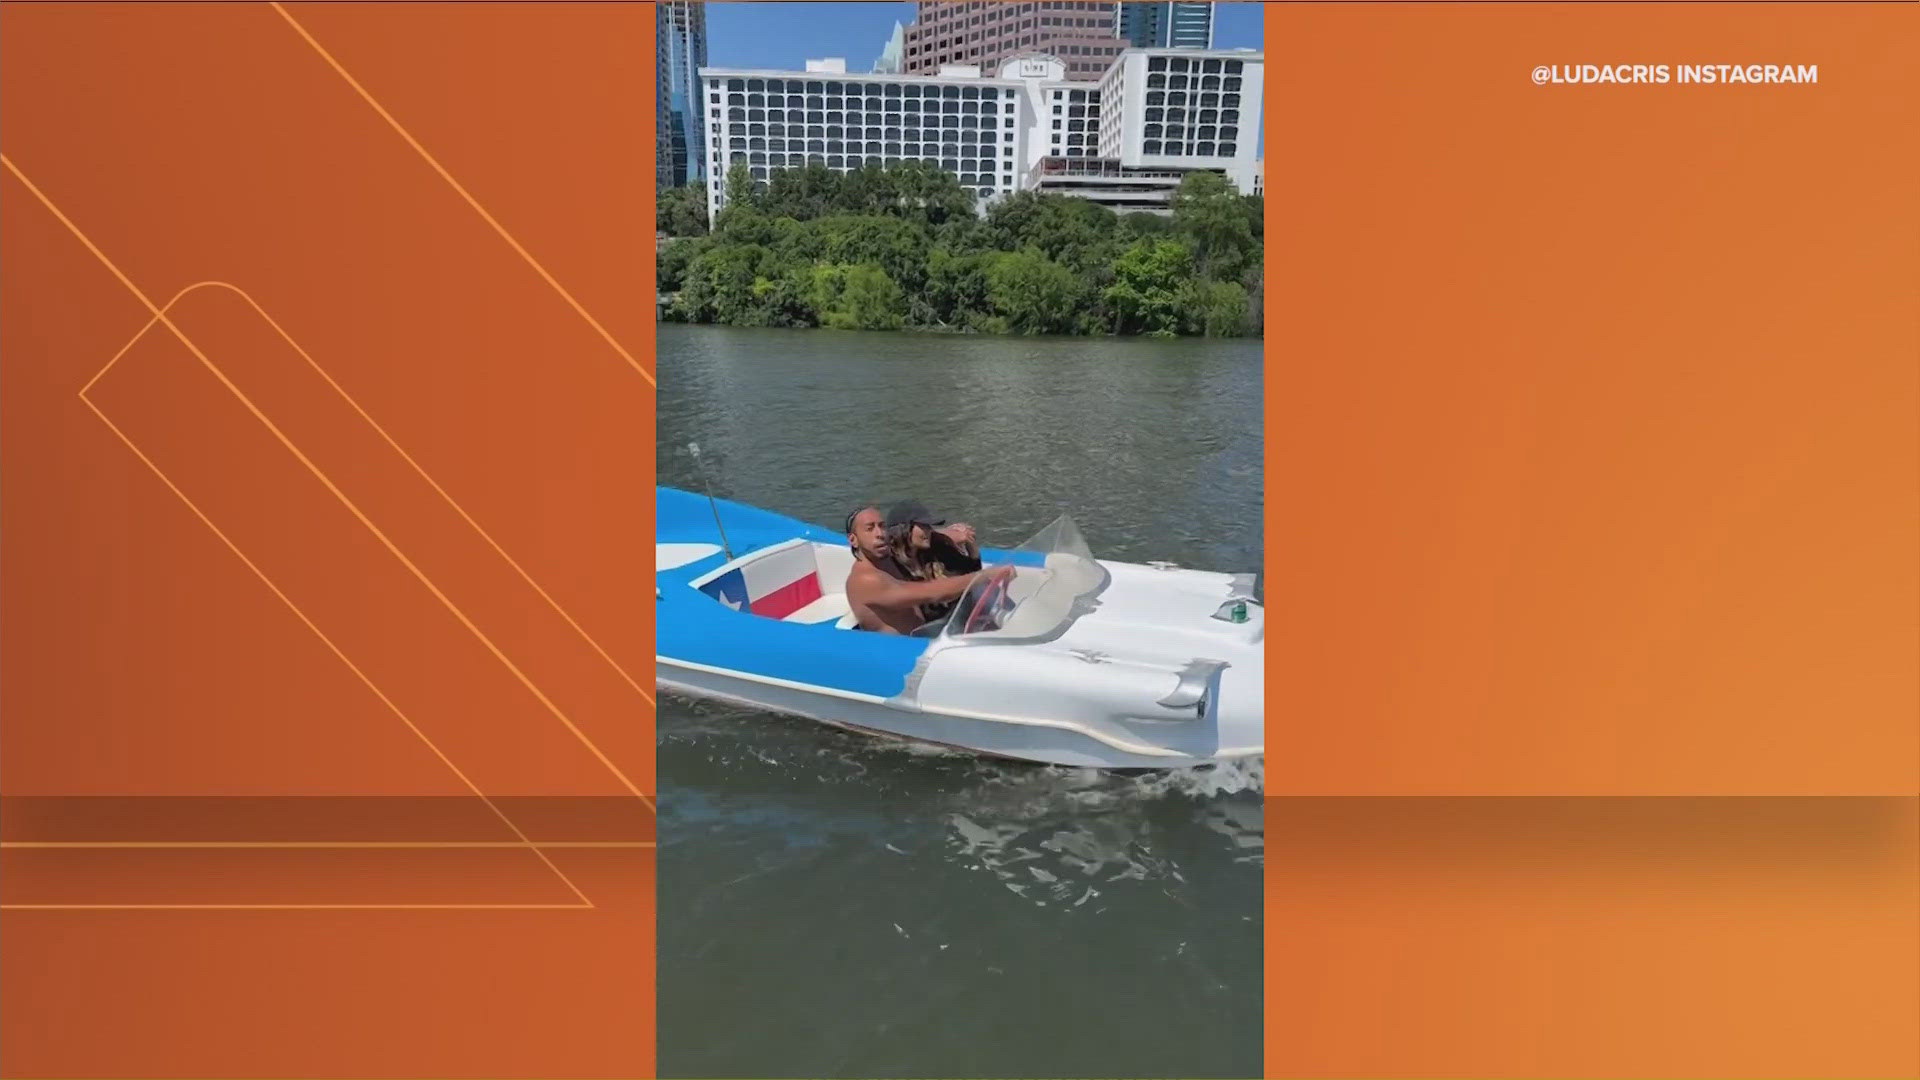 The rapper and his wife were seen riding in a boat on the lake in a recent video.